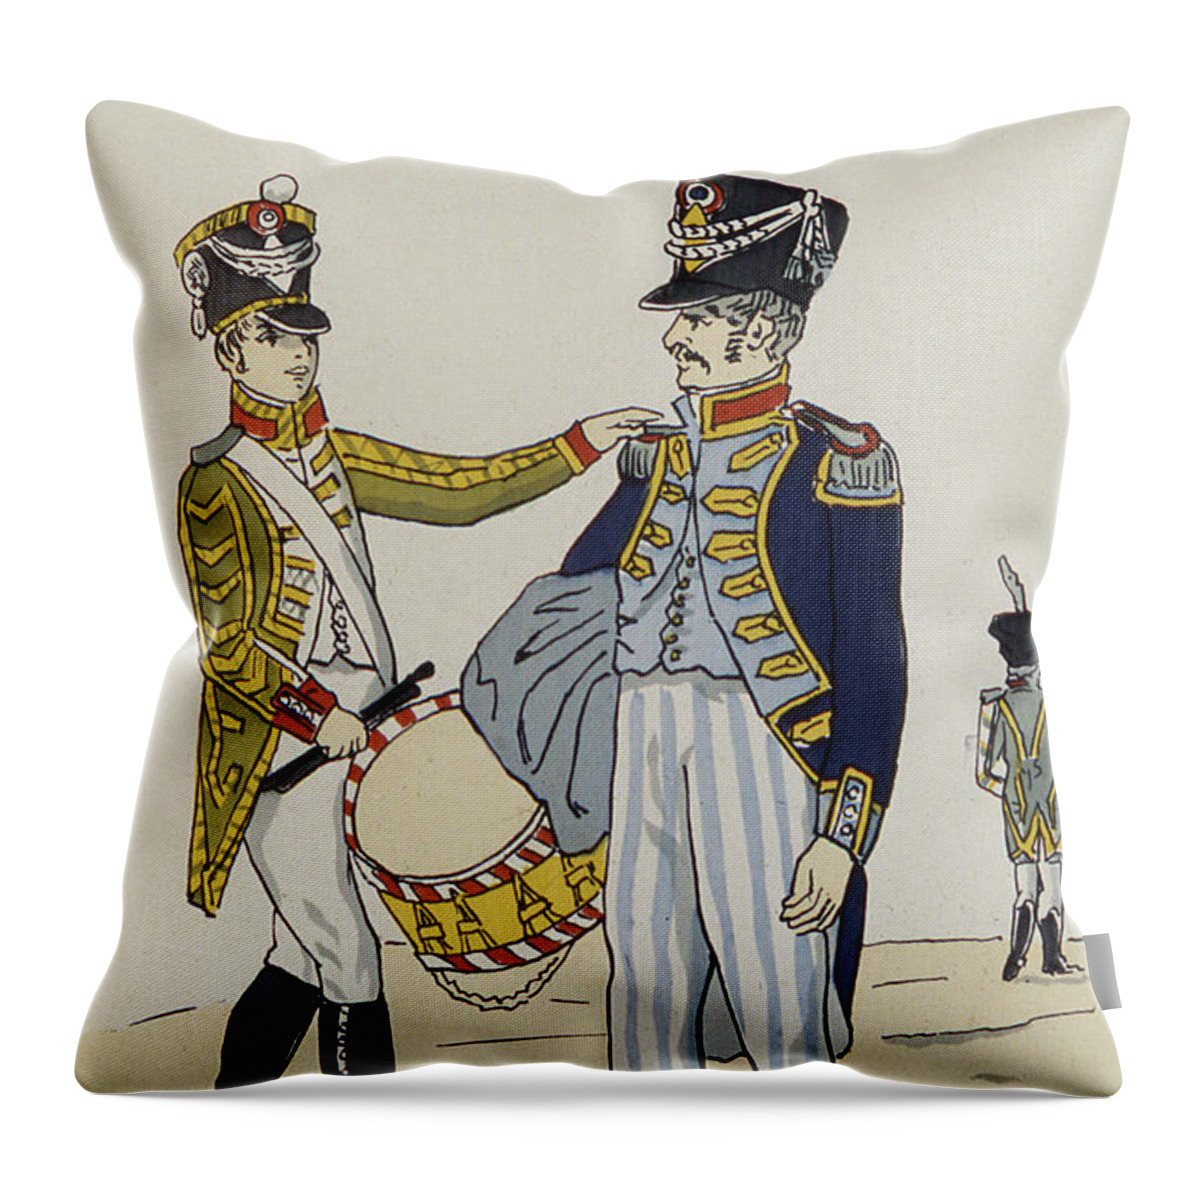 Drummer Throw Pillow featuring the drawing A Drummer and Master Baker of the Prefectural Guard of Hamburg by Christoph Suhr